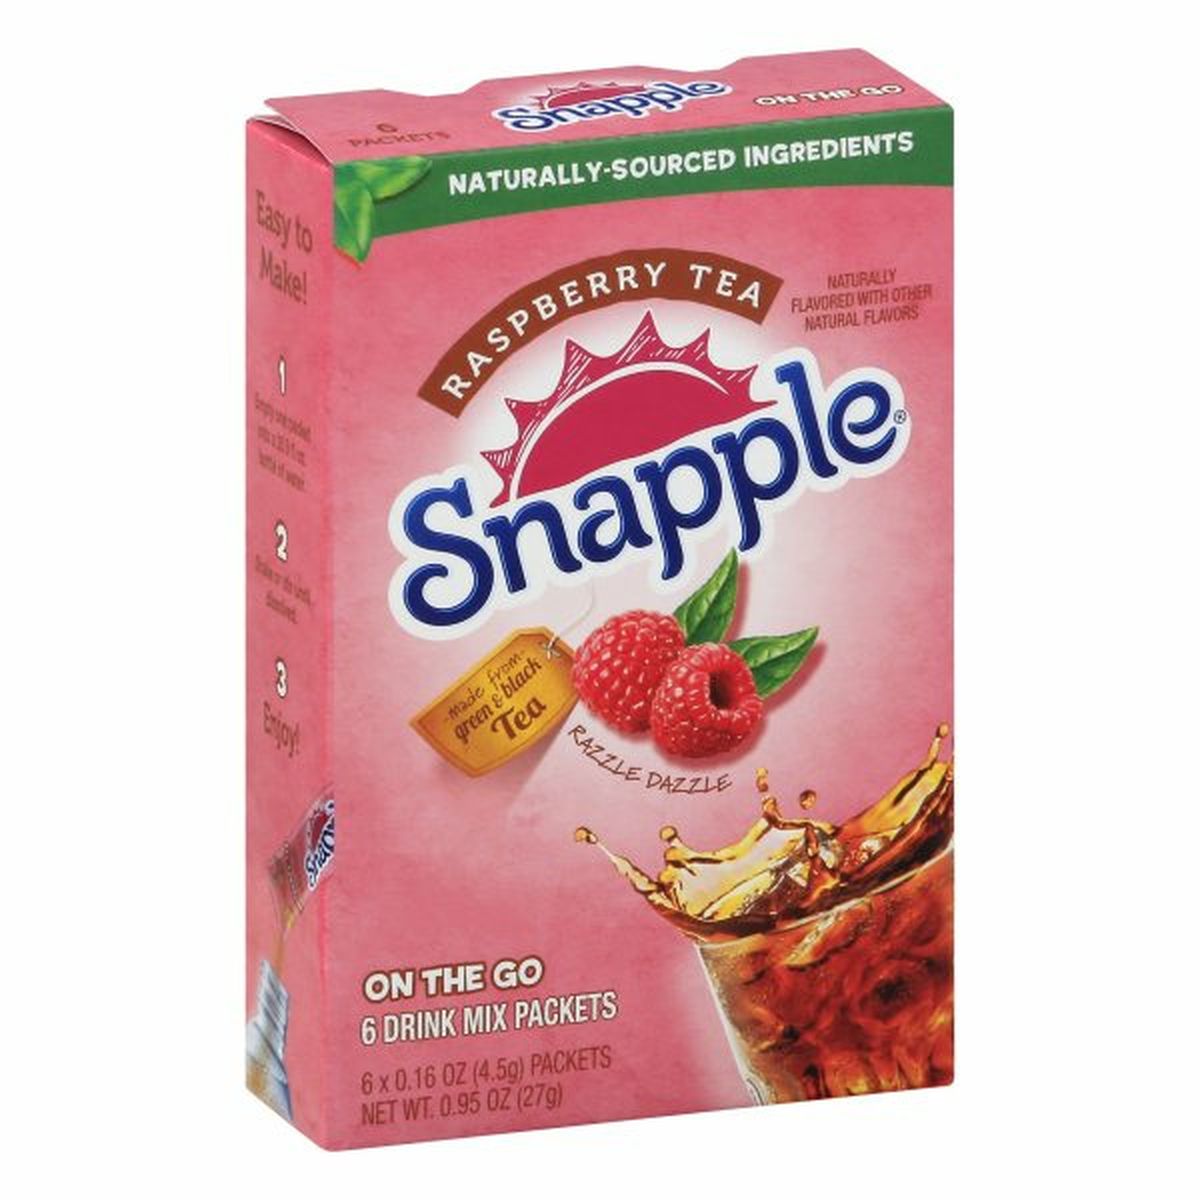 Calories in Snapple Drink Mix Packets, Raspberry Tea, On The Go